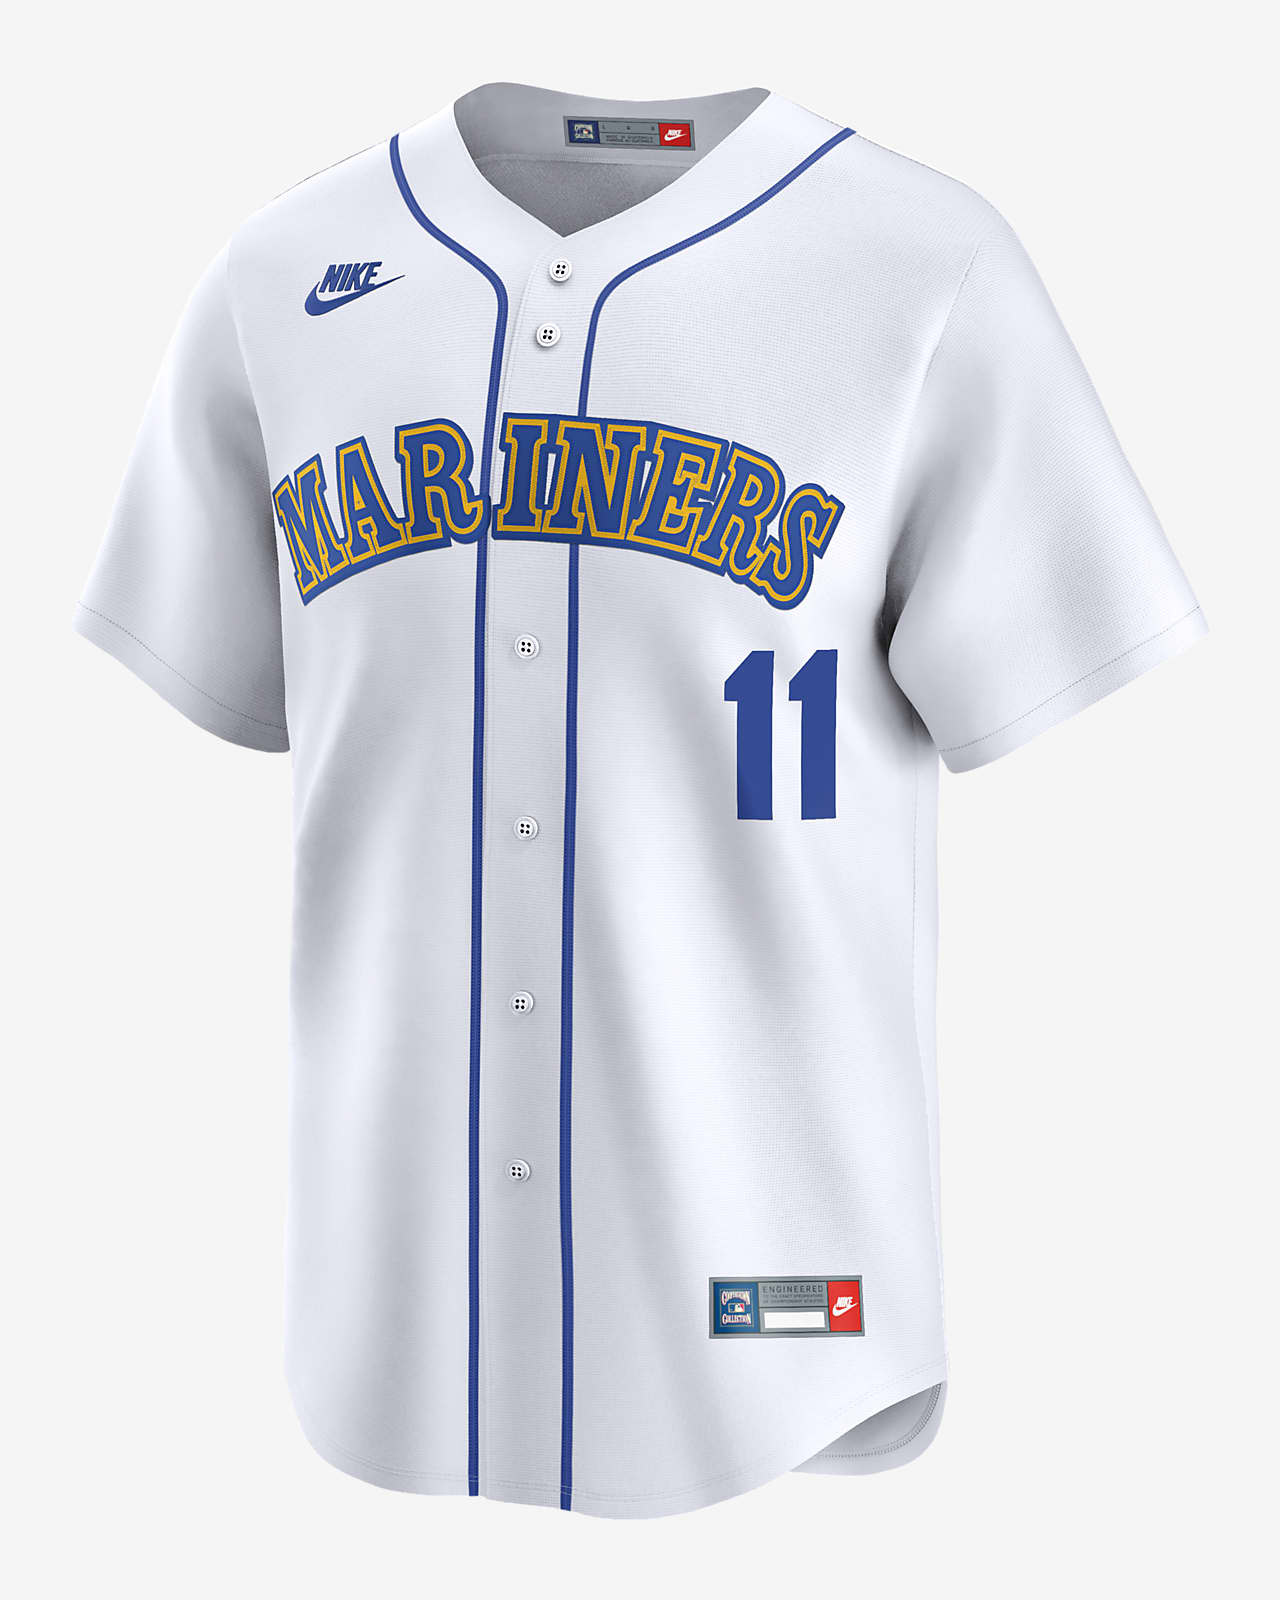 Edgar Martínez Seattle Mariners Cooperstown Men's Nike Dri-FIT ADV MLB Limited Jersey